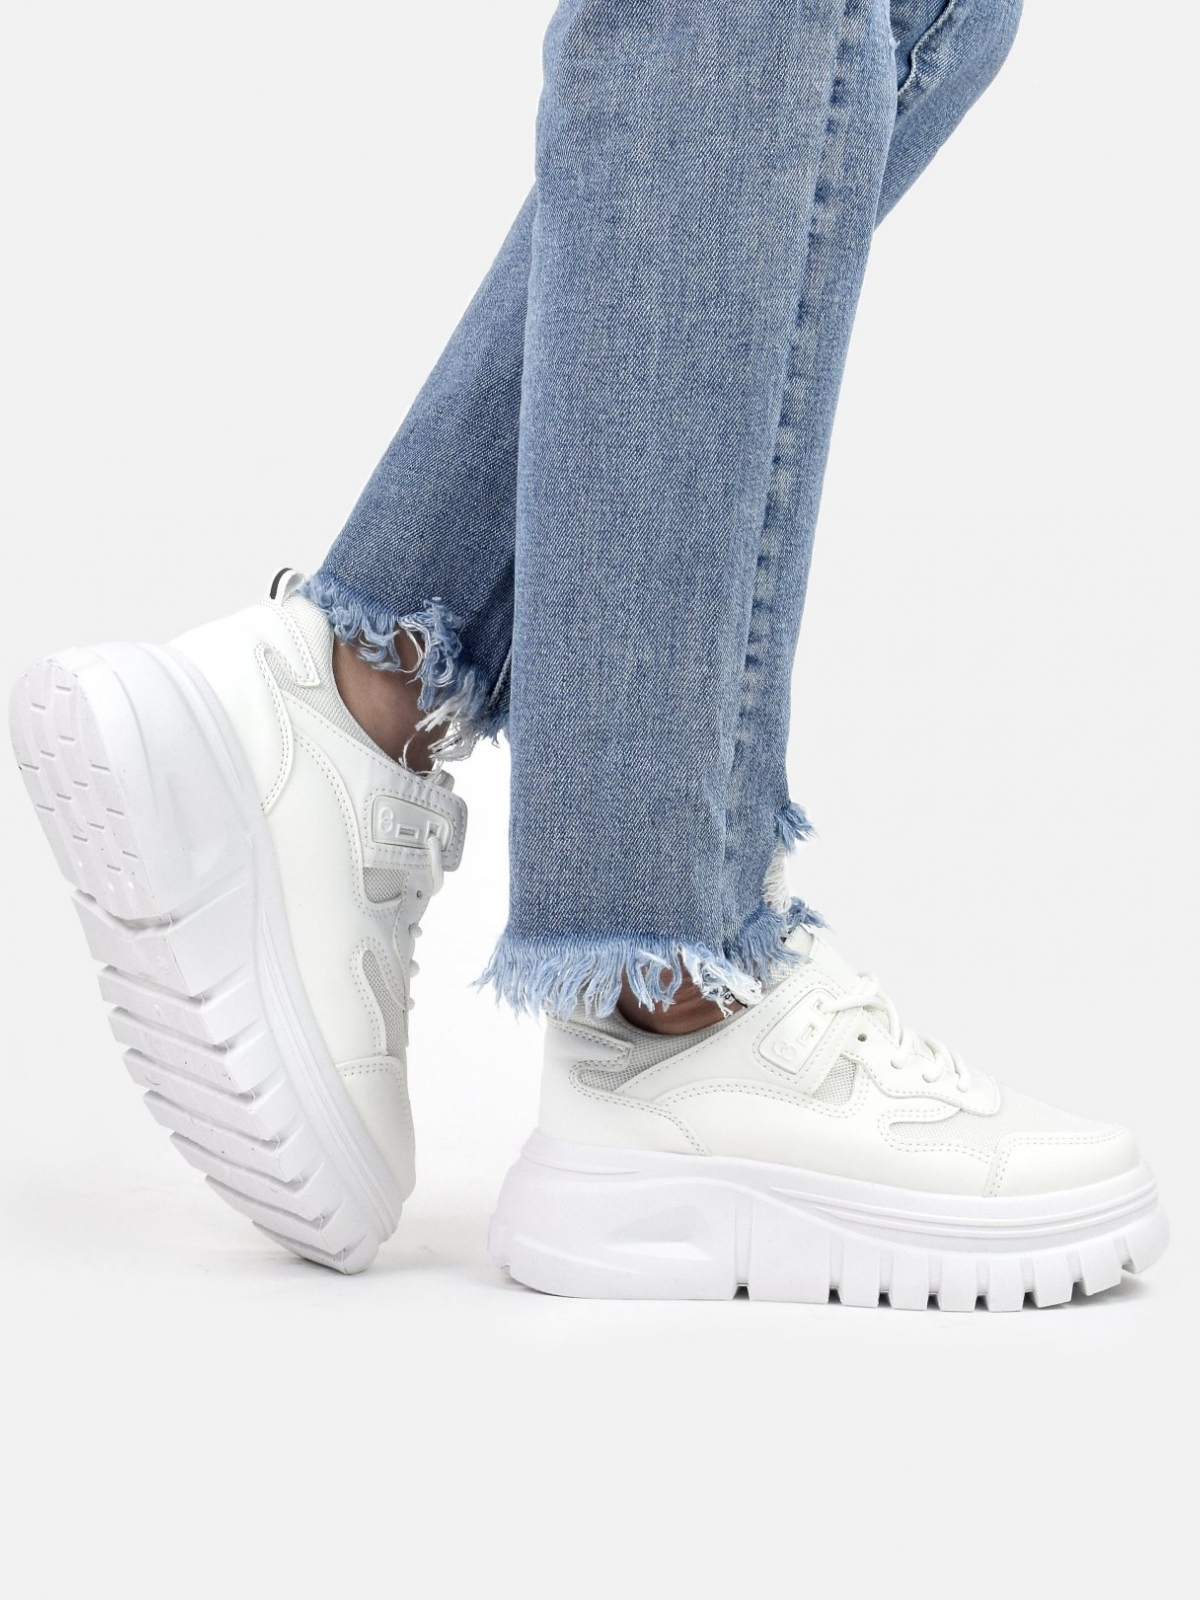 American style sneaker with thick sole in white